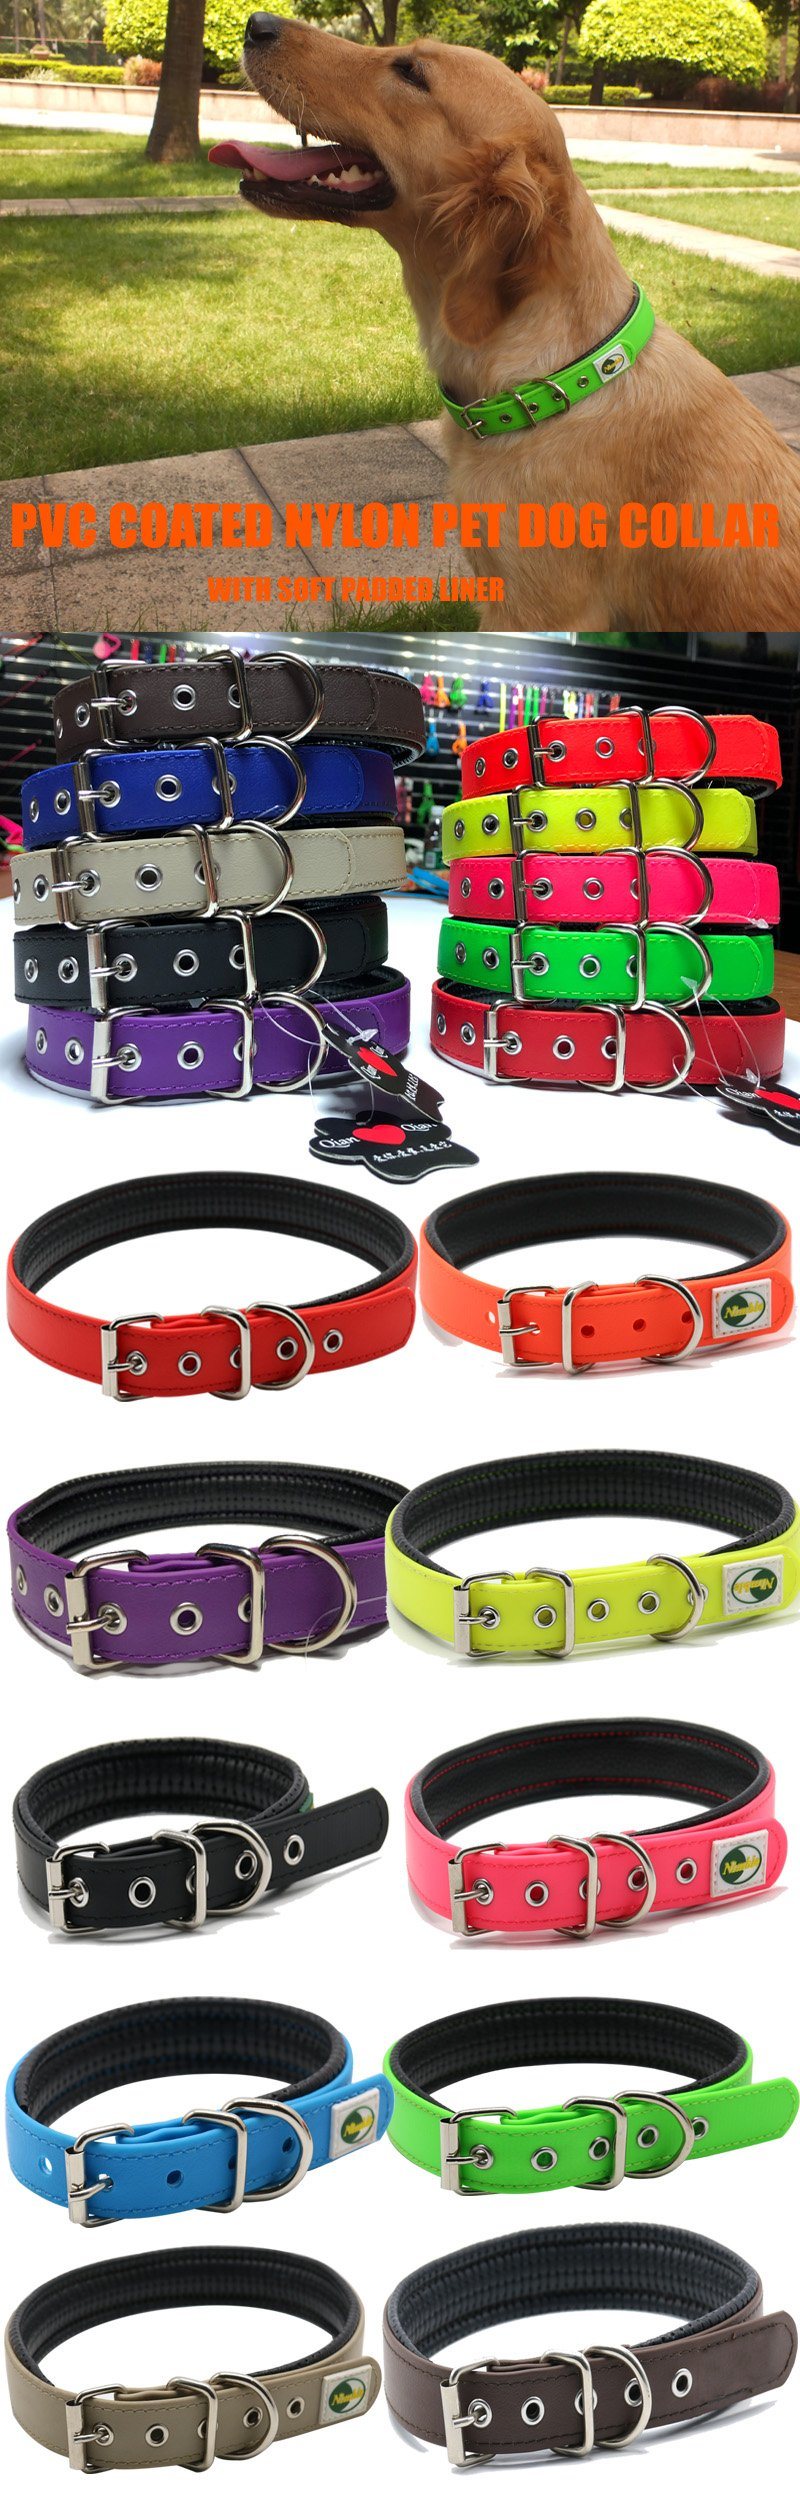 Waterproof Pet Dog Training Collar, PVC Coated Nylon Pet Collar Leash with Soft Padded Liner